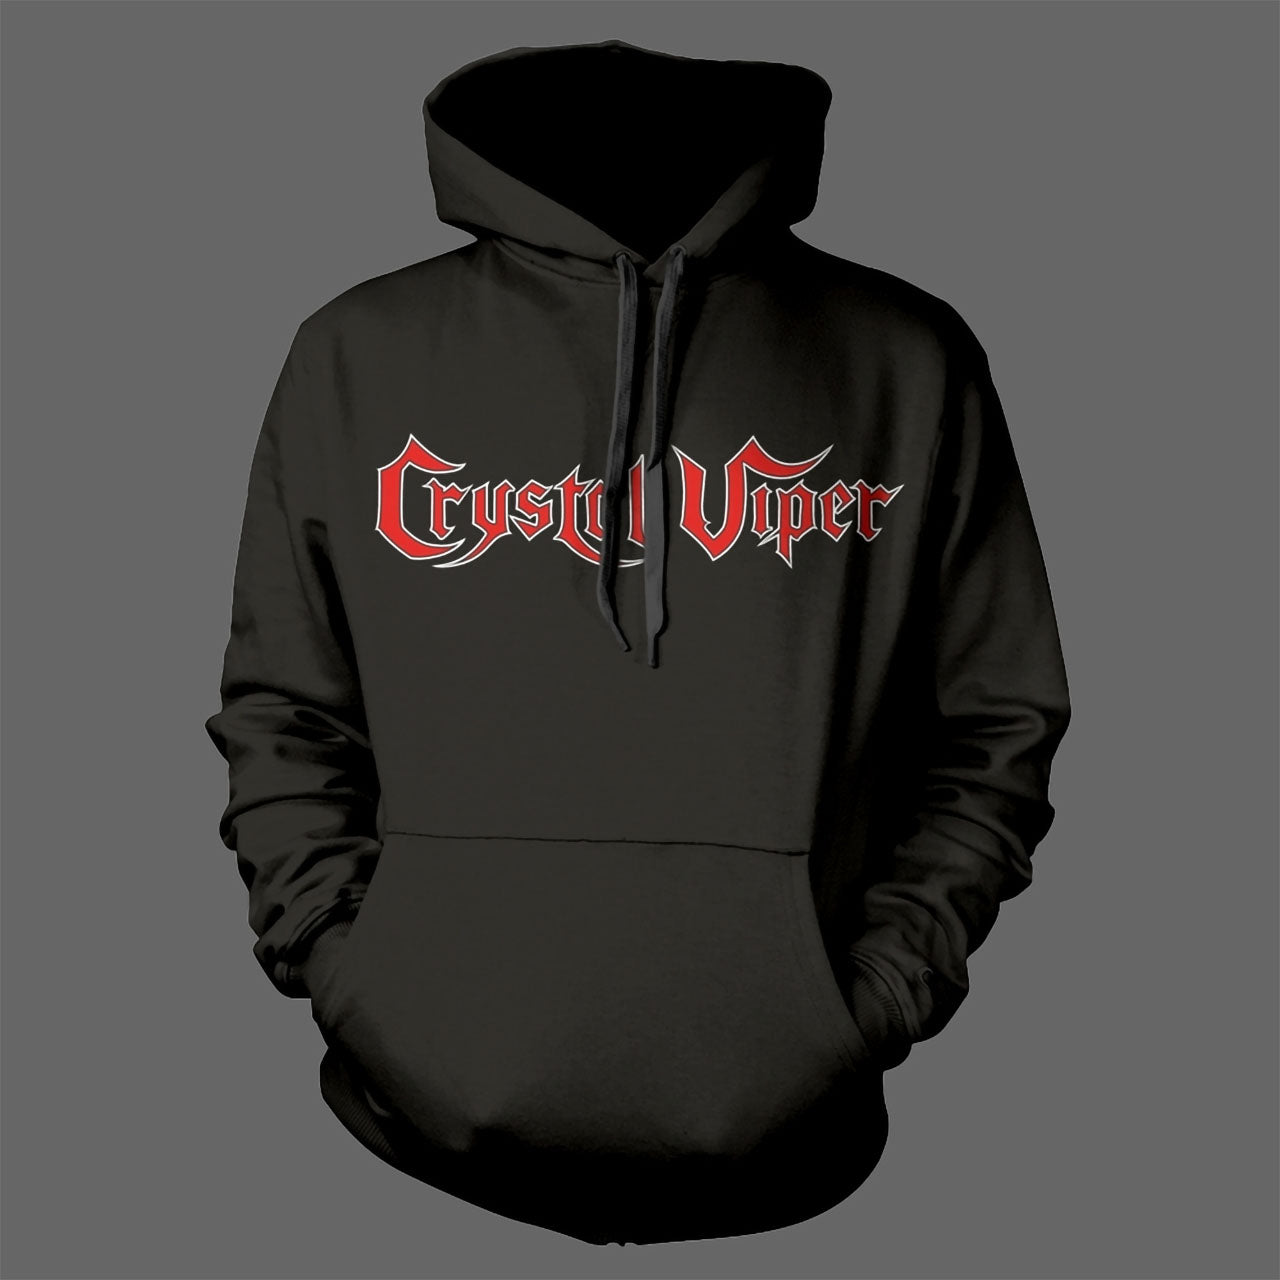 Crystal Viper - The Wolf and the Witch (Hoodie)